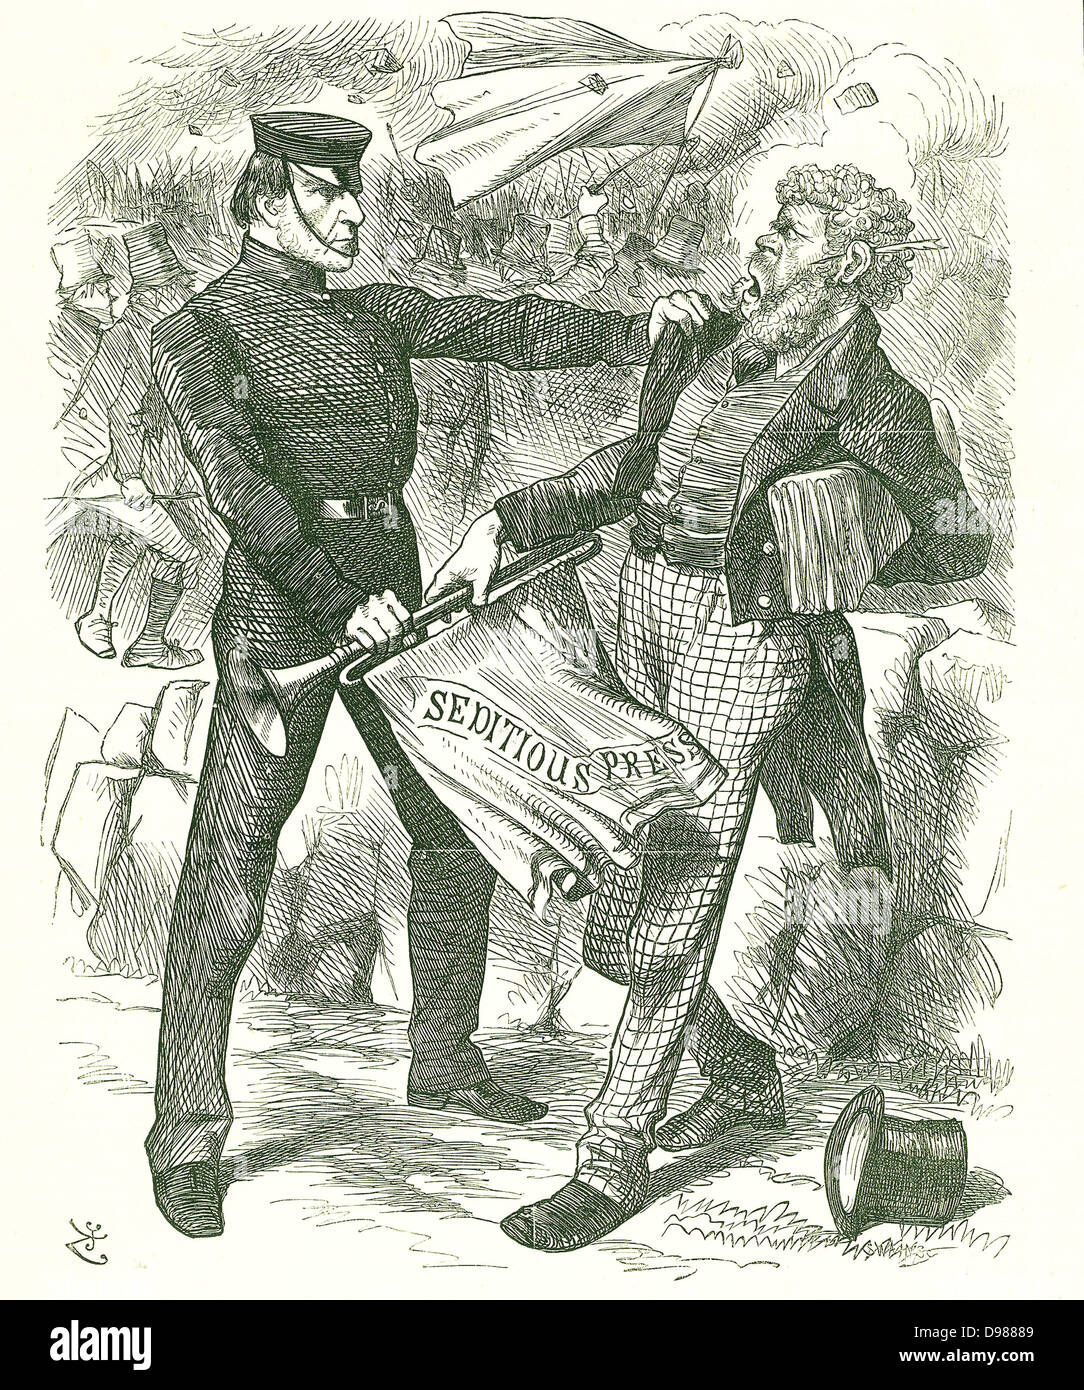 Silencing the Trumpet. (after Aesop)': Prime Minister Gladstone silencing the Irish press for inciting Fenian violence. John Tenniel cartoon from 'Punch', London, 9 April 1870. Stock Photo